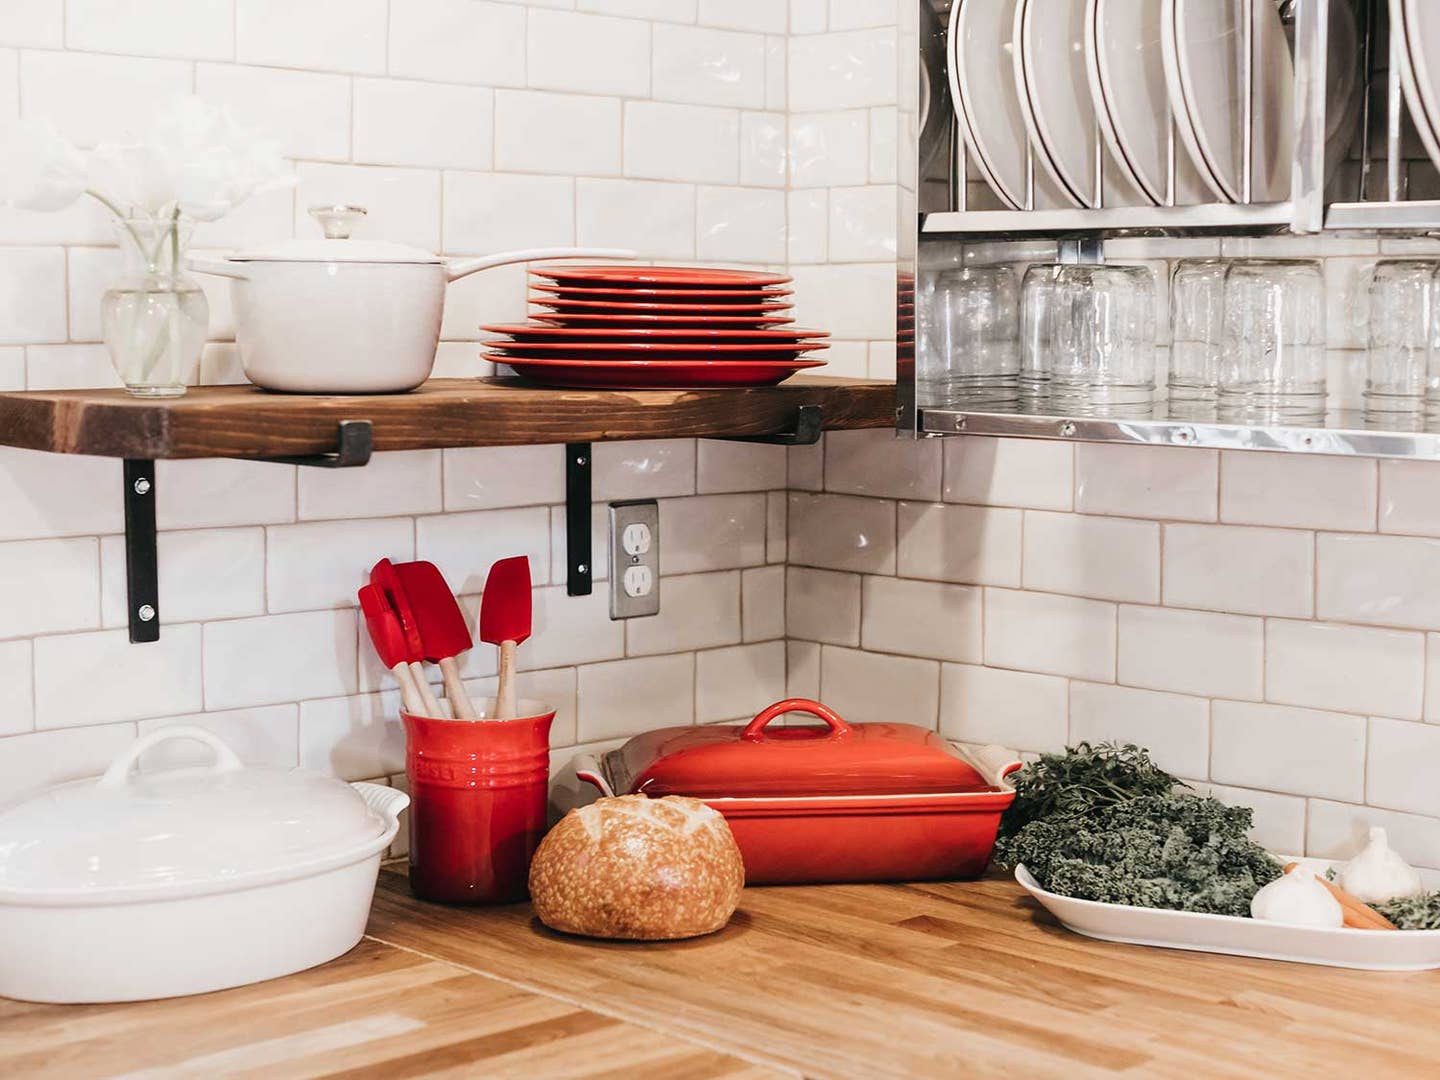 Prime Day Kitchen Deals—Handpicked by Saveur Editors